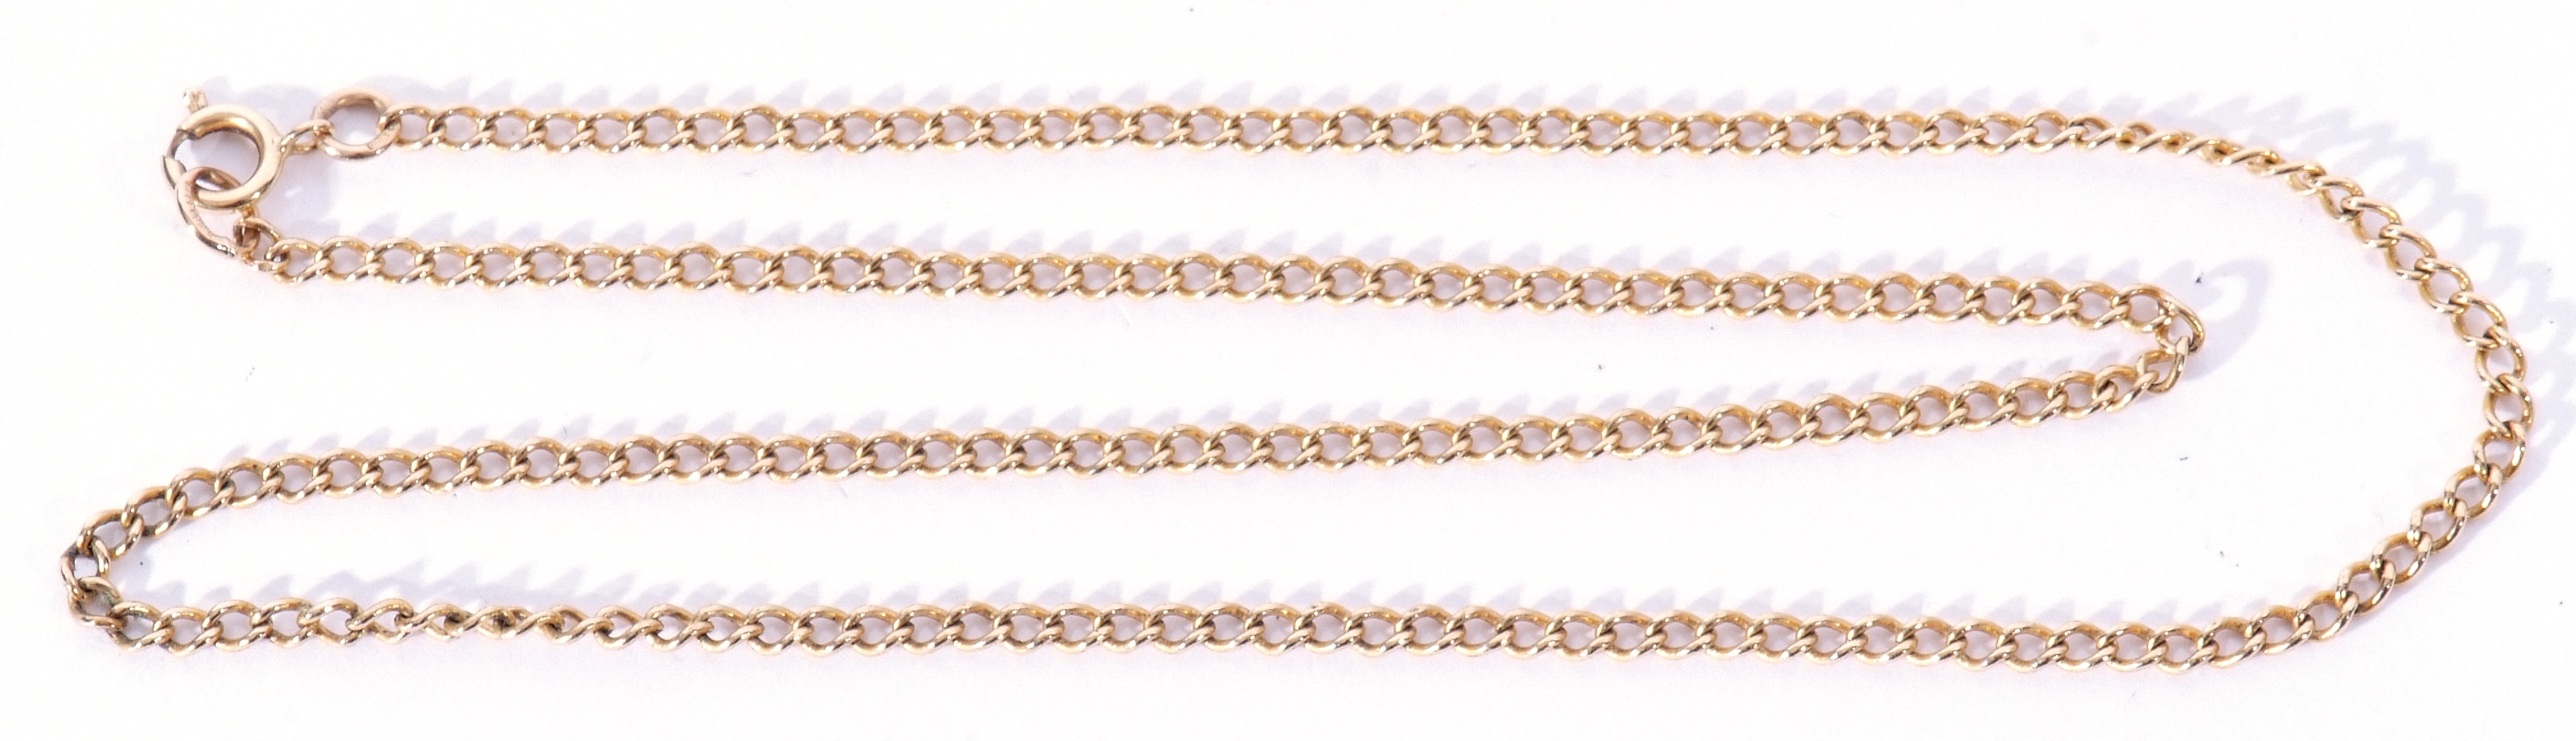 9ct stamped oval link chain, 45cm long, 5.3gms